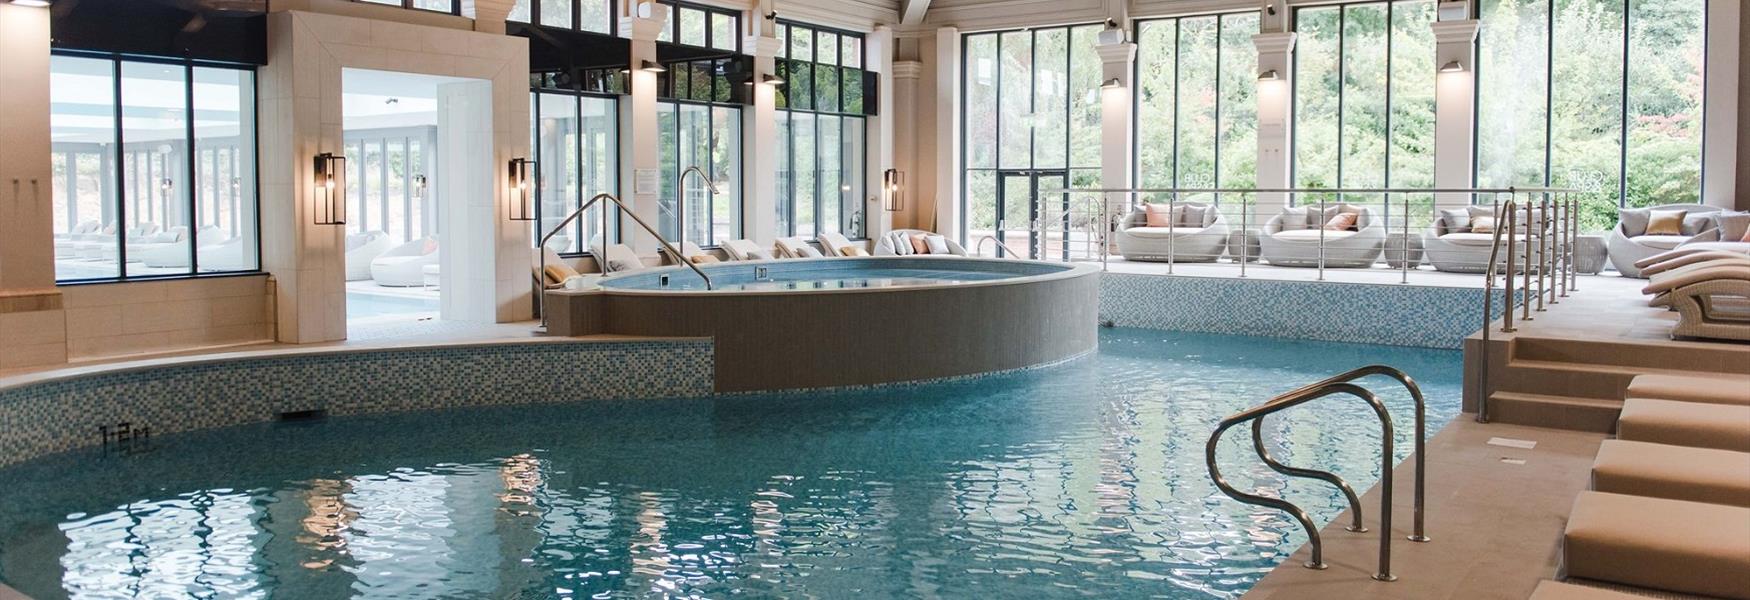 Spa Hotels in Chester & Cheshire